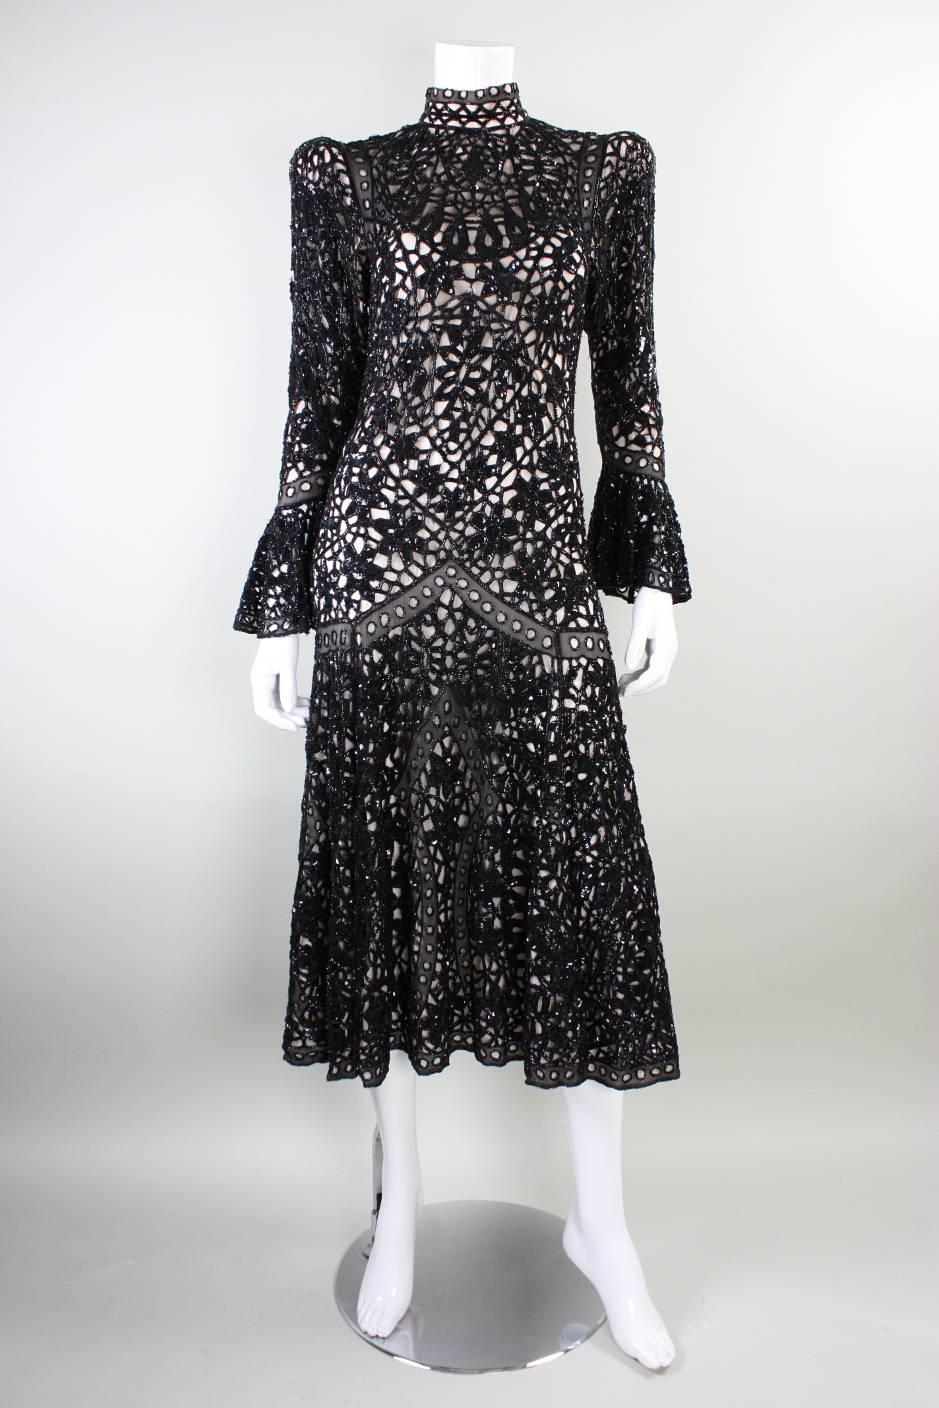 Vintage evening dress from English brand Eavis & Brown dates to the 1980's through 1990's.  It is made of jet black lace that is adorned with black beading and sequins. Nude chiffon lining. Center back looped button closure.  

Labeled a size